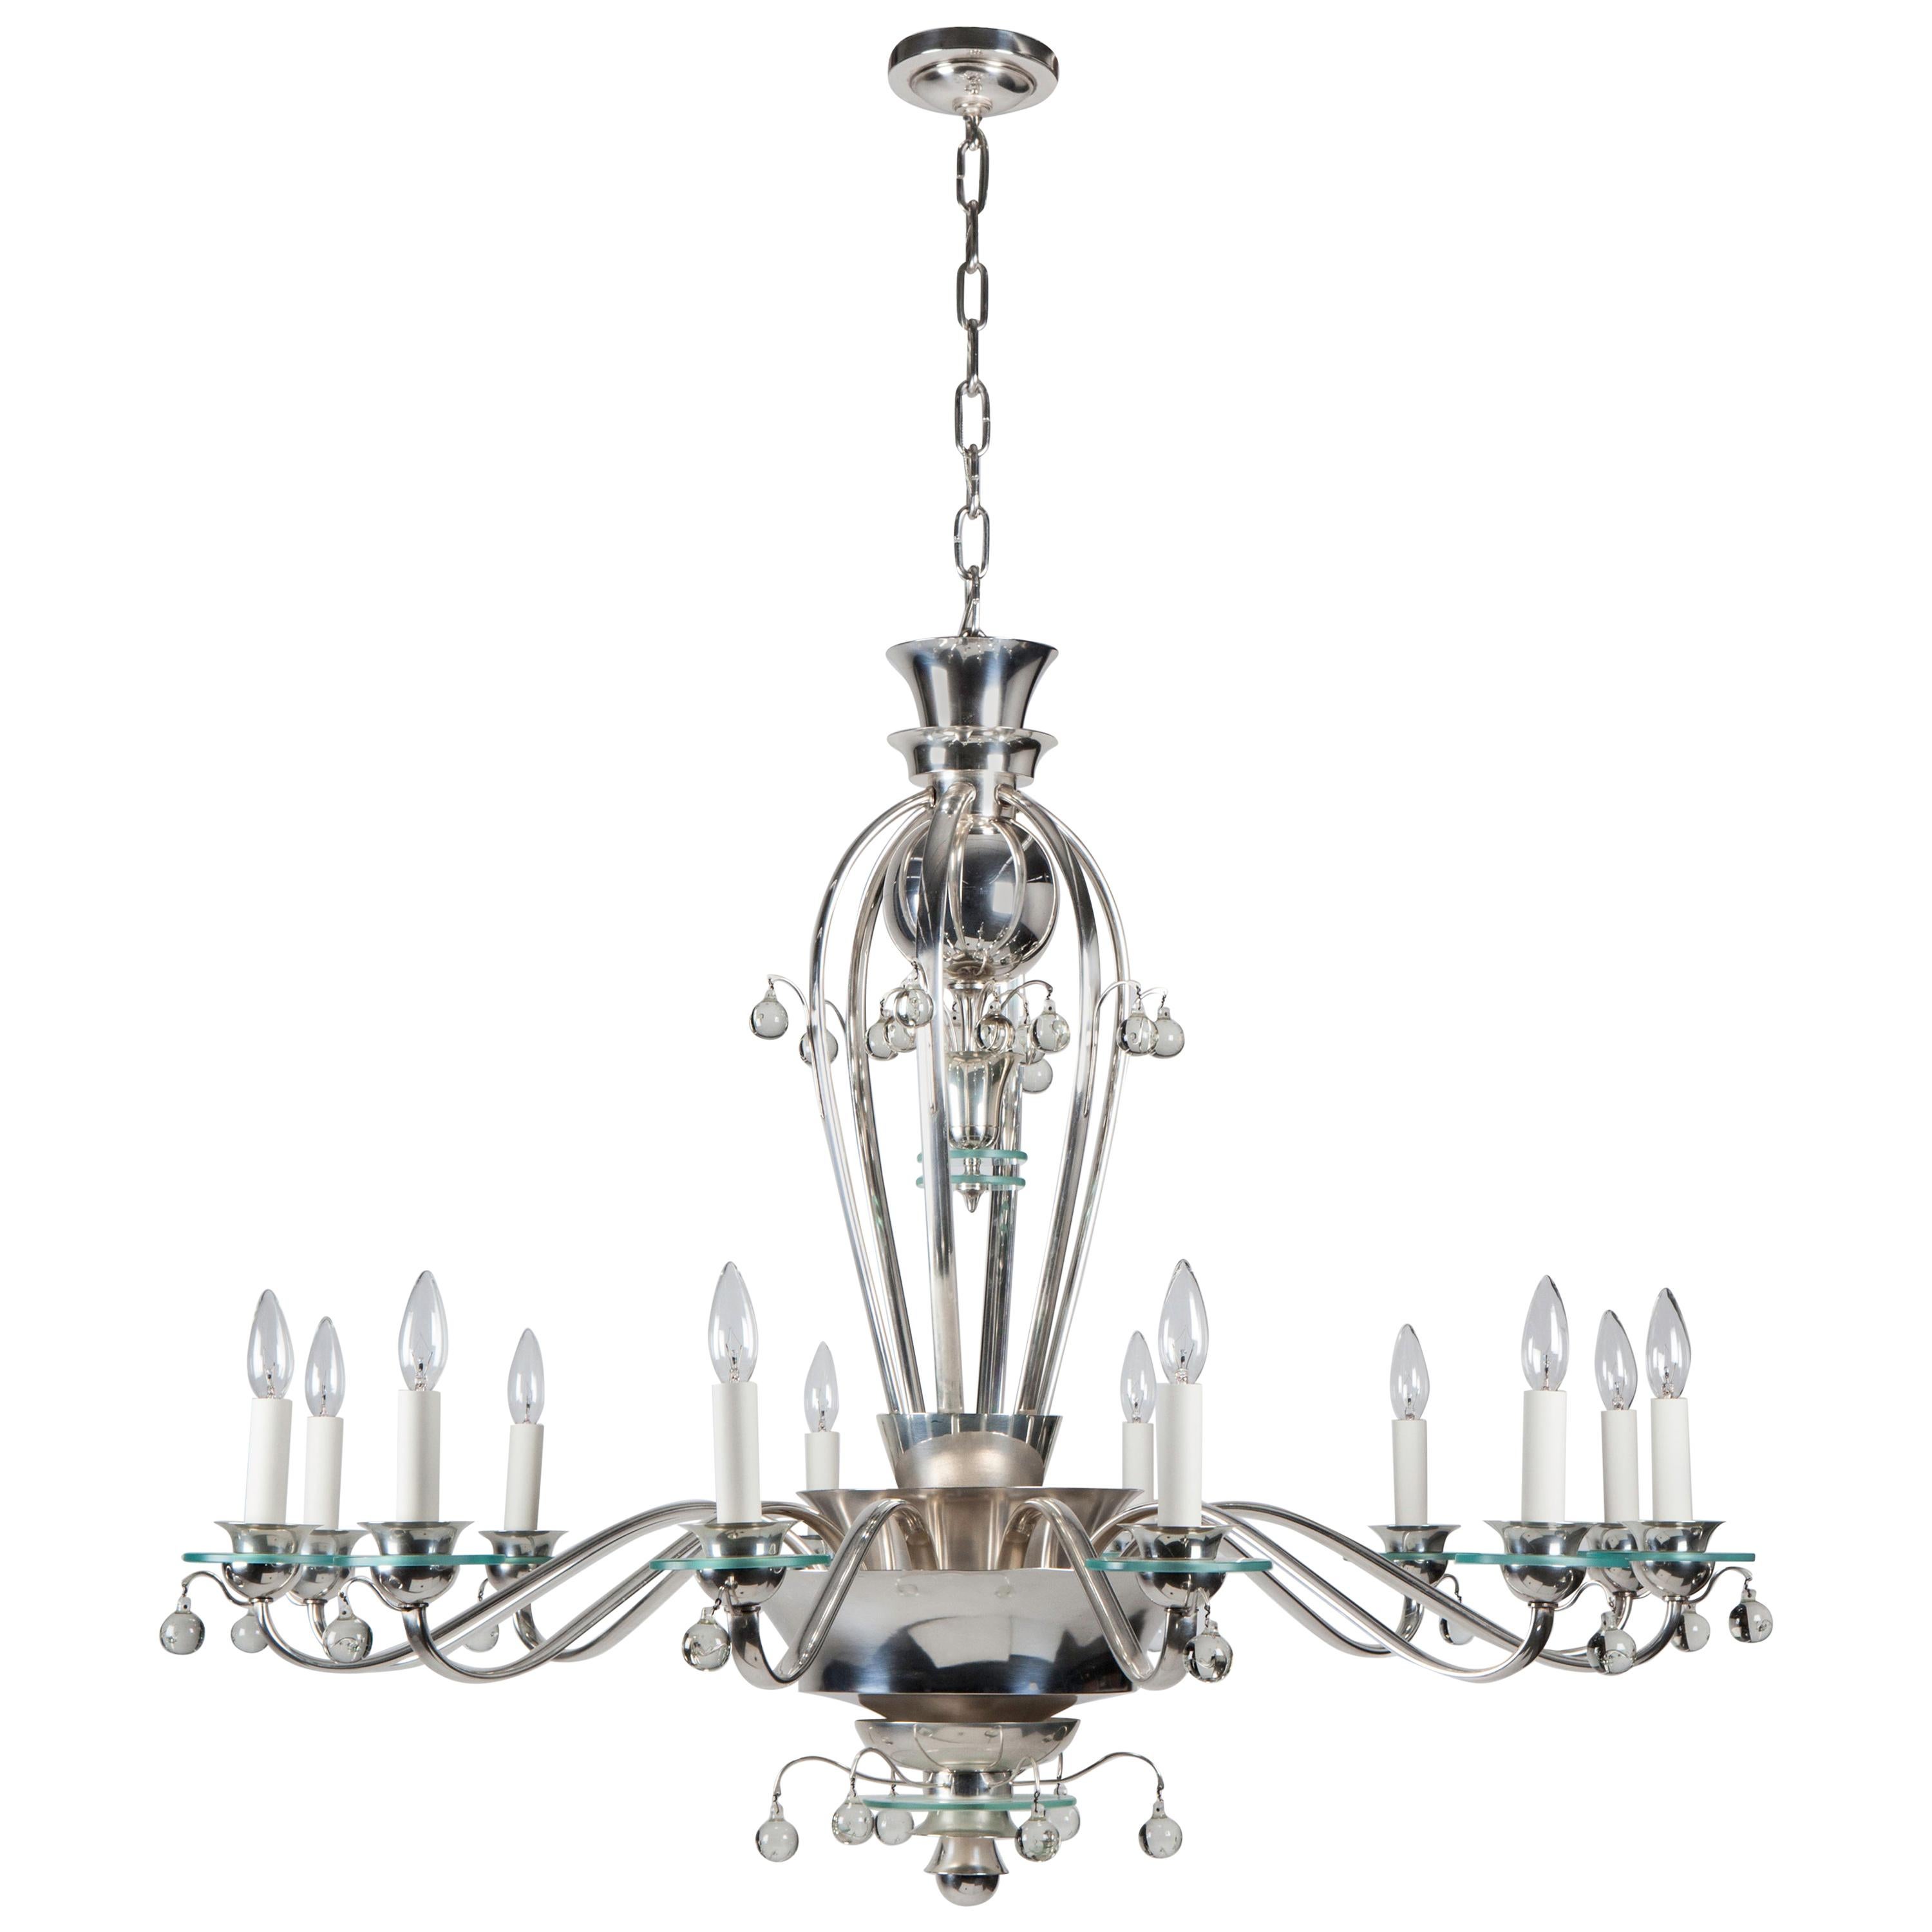 Silver Plate and Glass Art Deco Chandelier with Crystal Ball Drops, circa 1930s